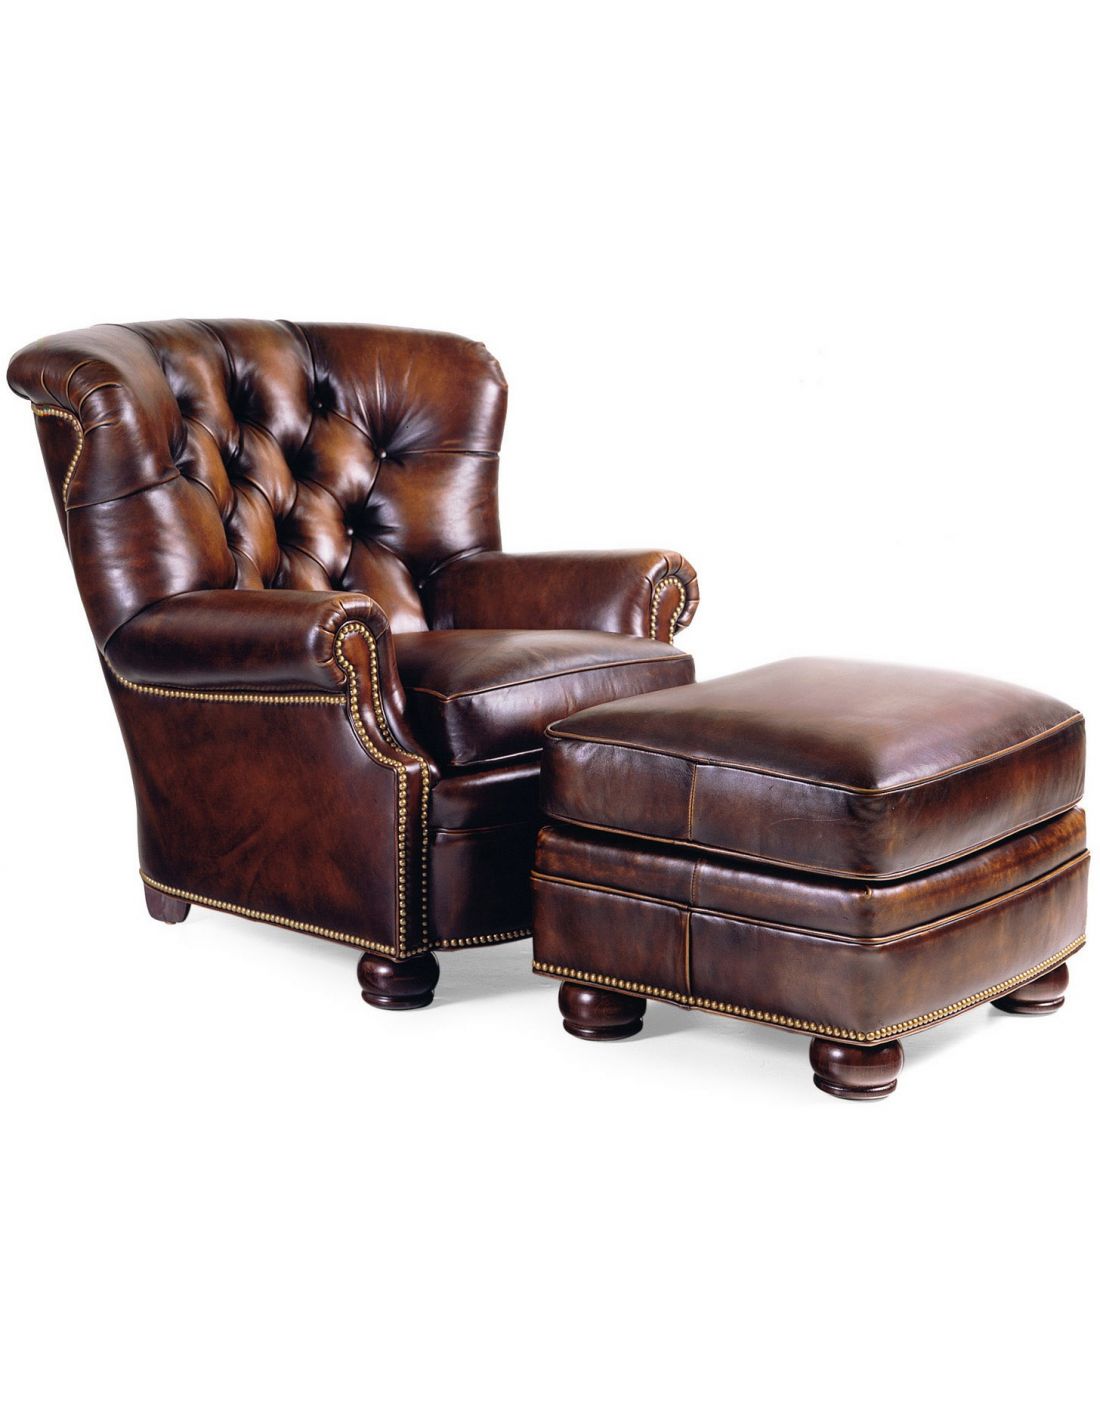 Classic Tufted Leather Armchair And Ottoman, Tufted Leather Recliner